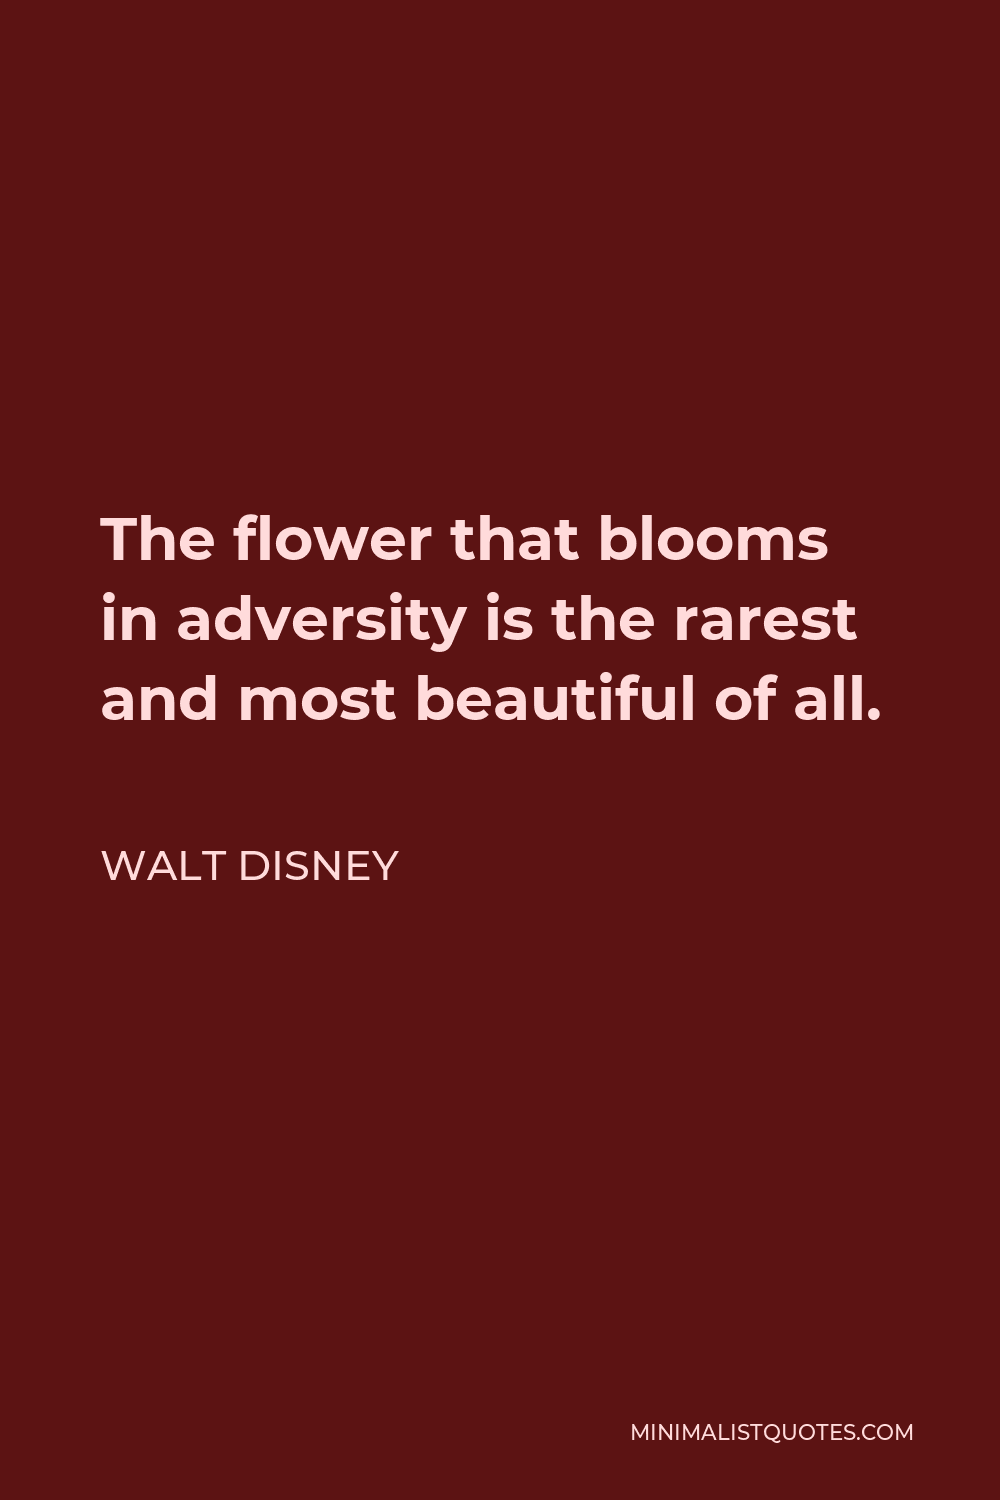 Walt Disney Quote - The flower that blooms in adversity is the rarest and most beautiful of all.